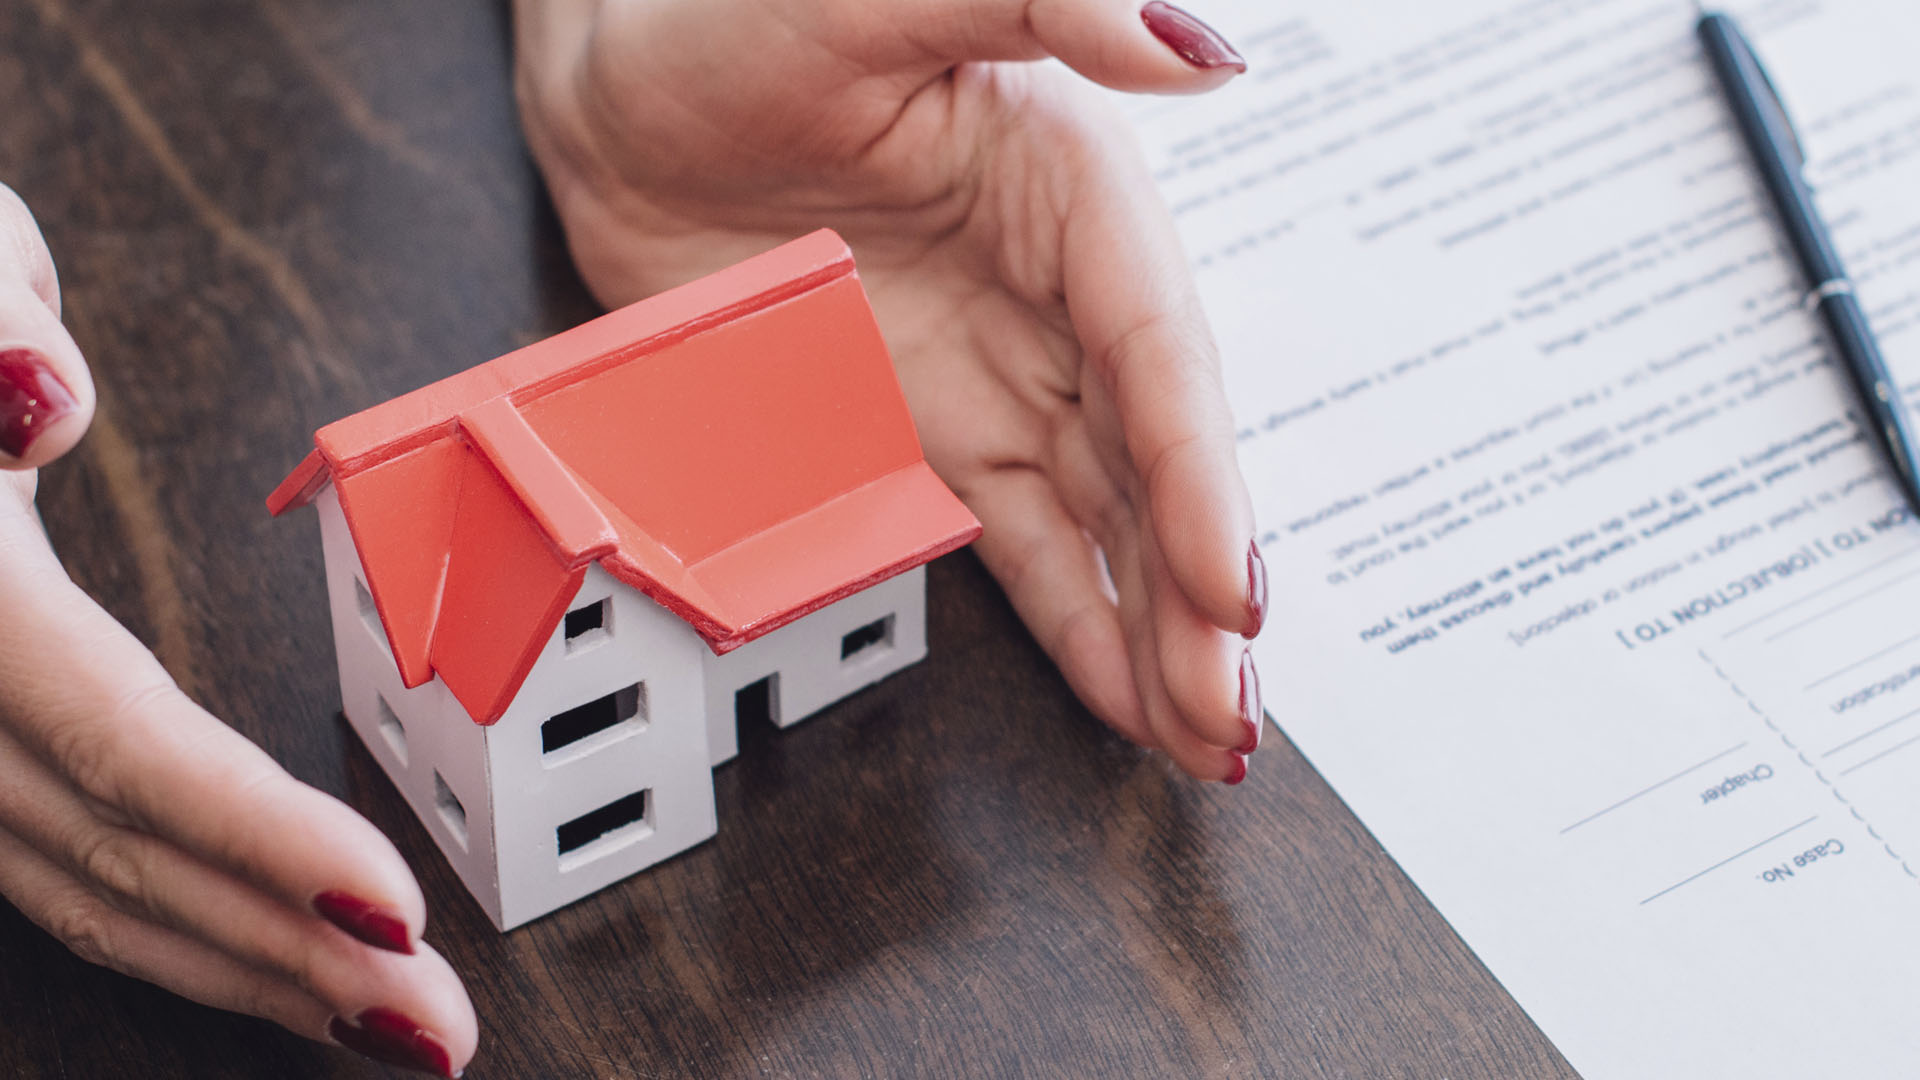 A person with red nails is holding a model house near a document and pen on a wooden table, prompting you to ask, "Is renting ruining your future?